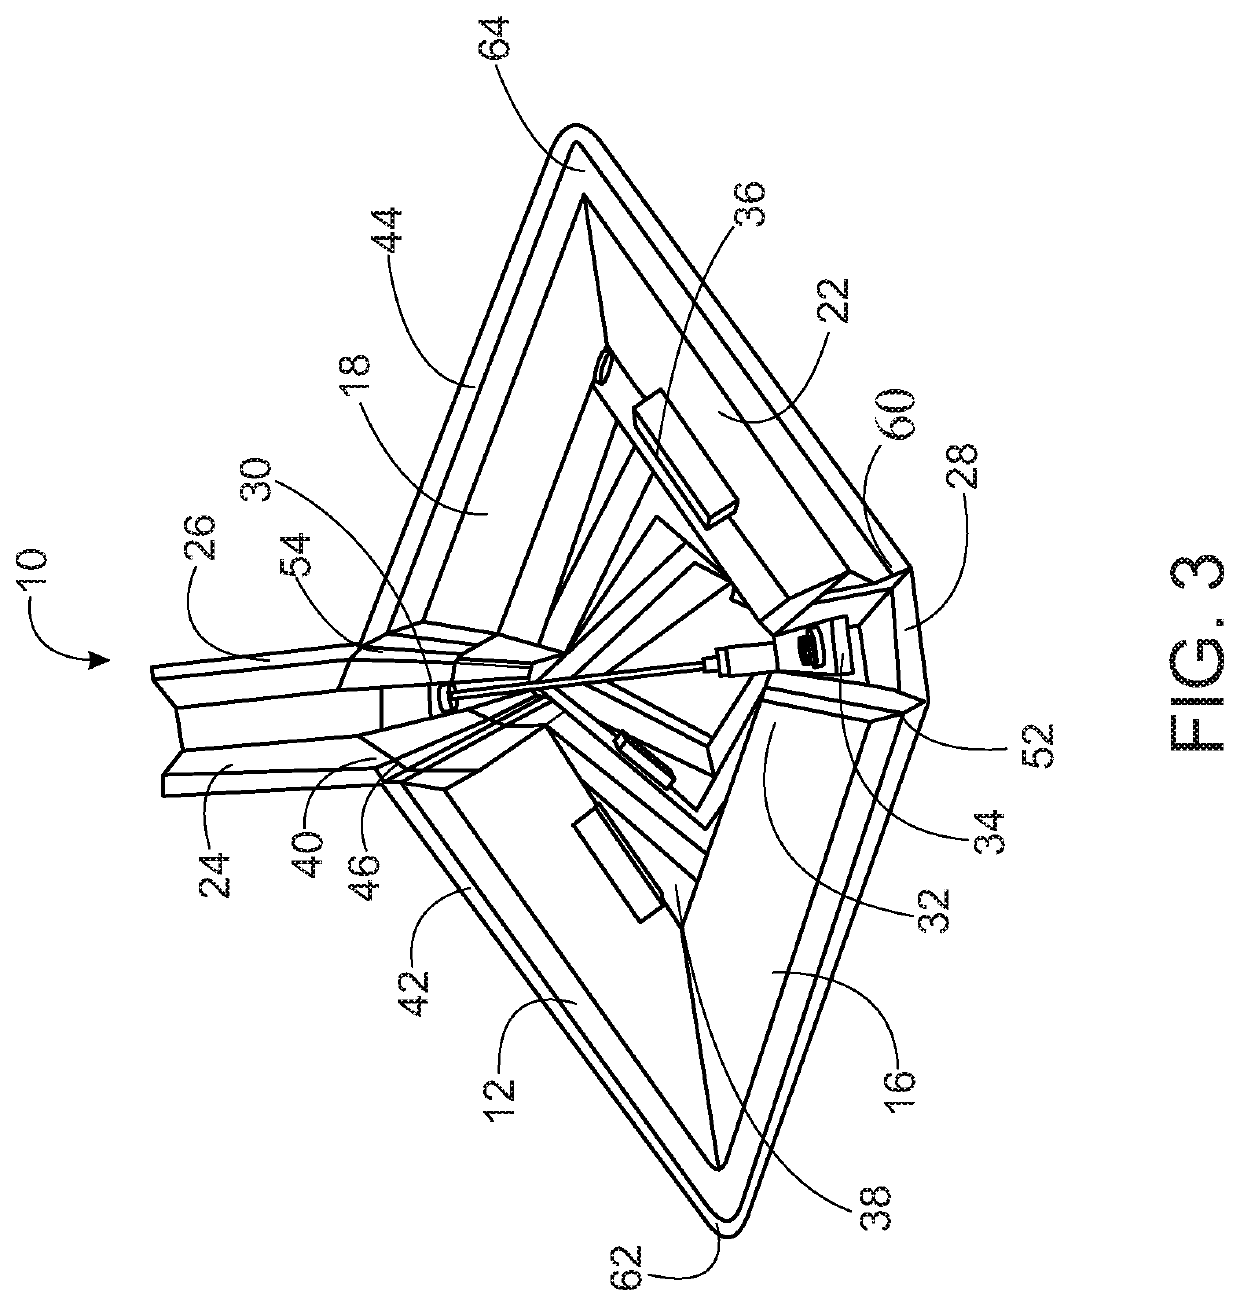 Apparatus and system for dynamic environmentally actuated ceiling baffle and methods thereof